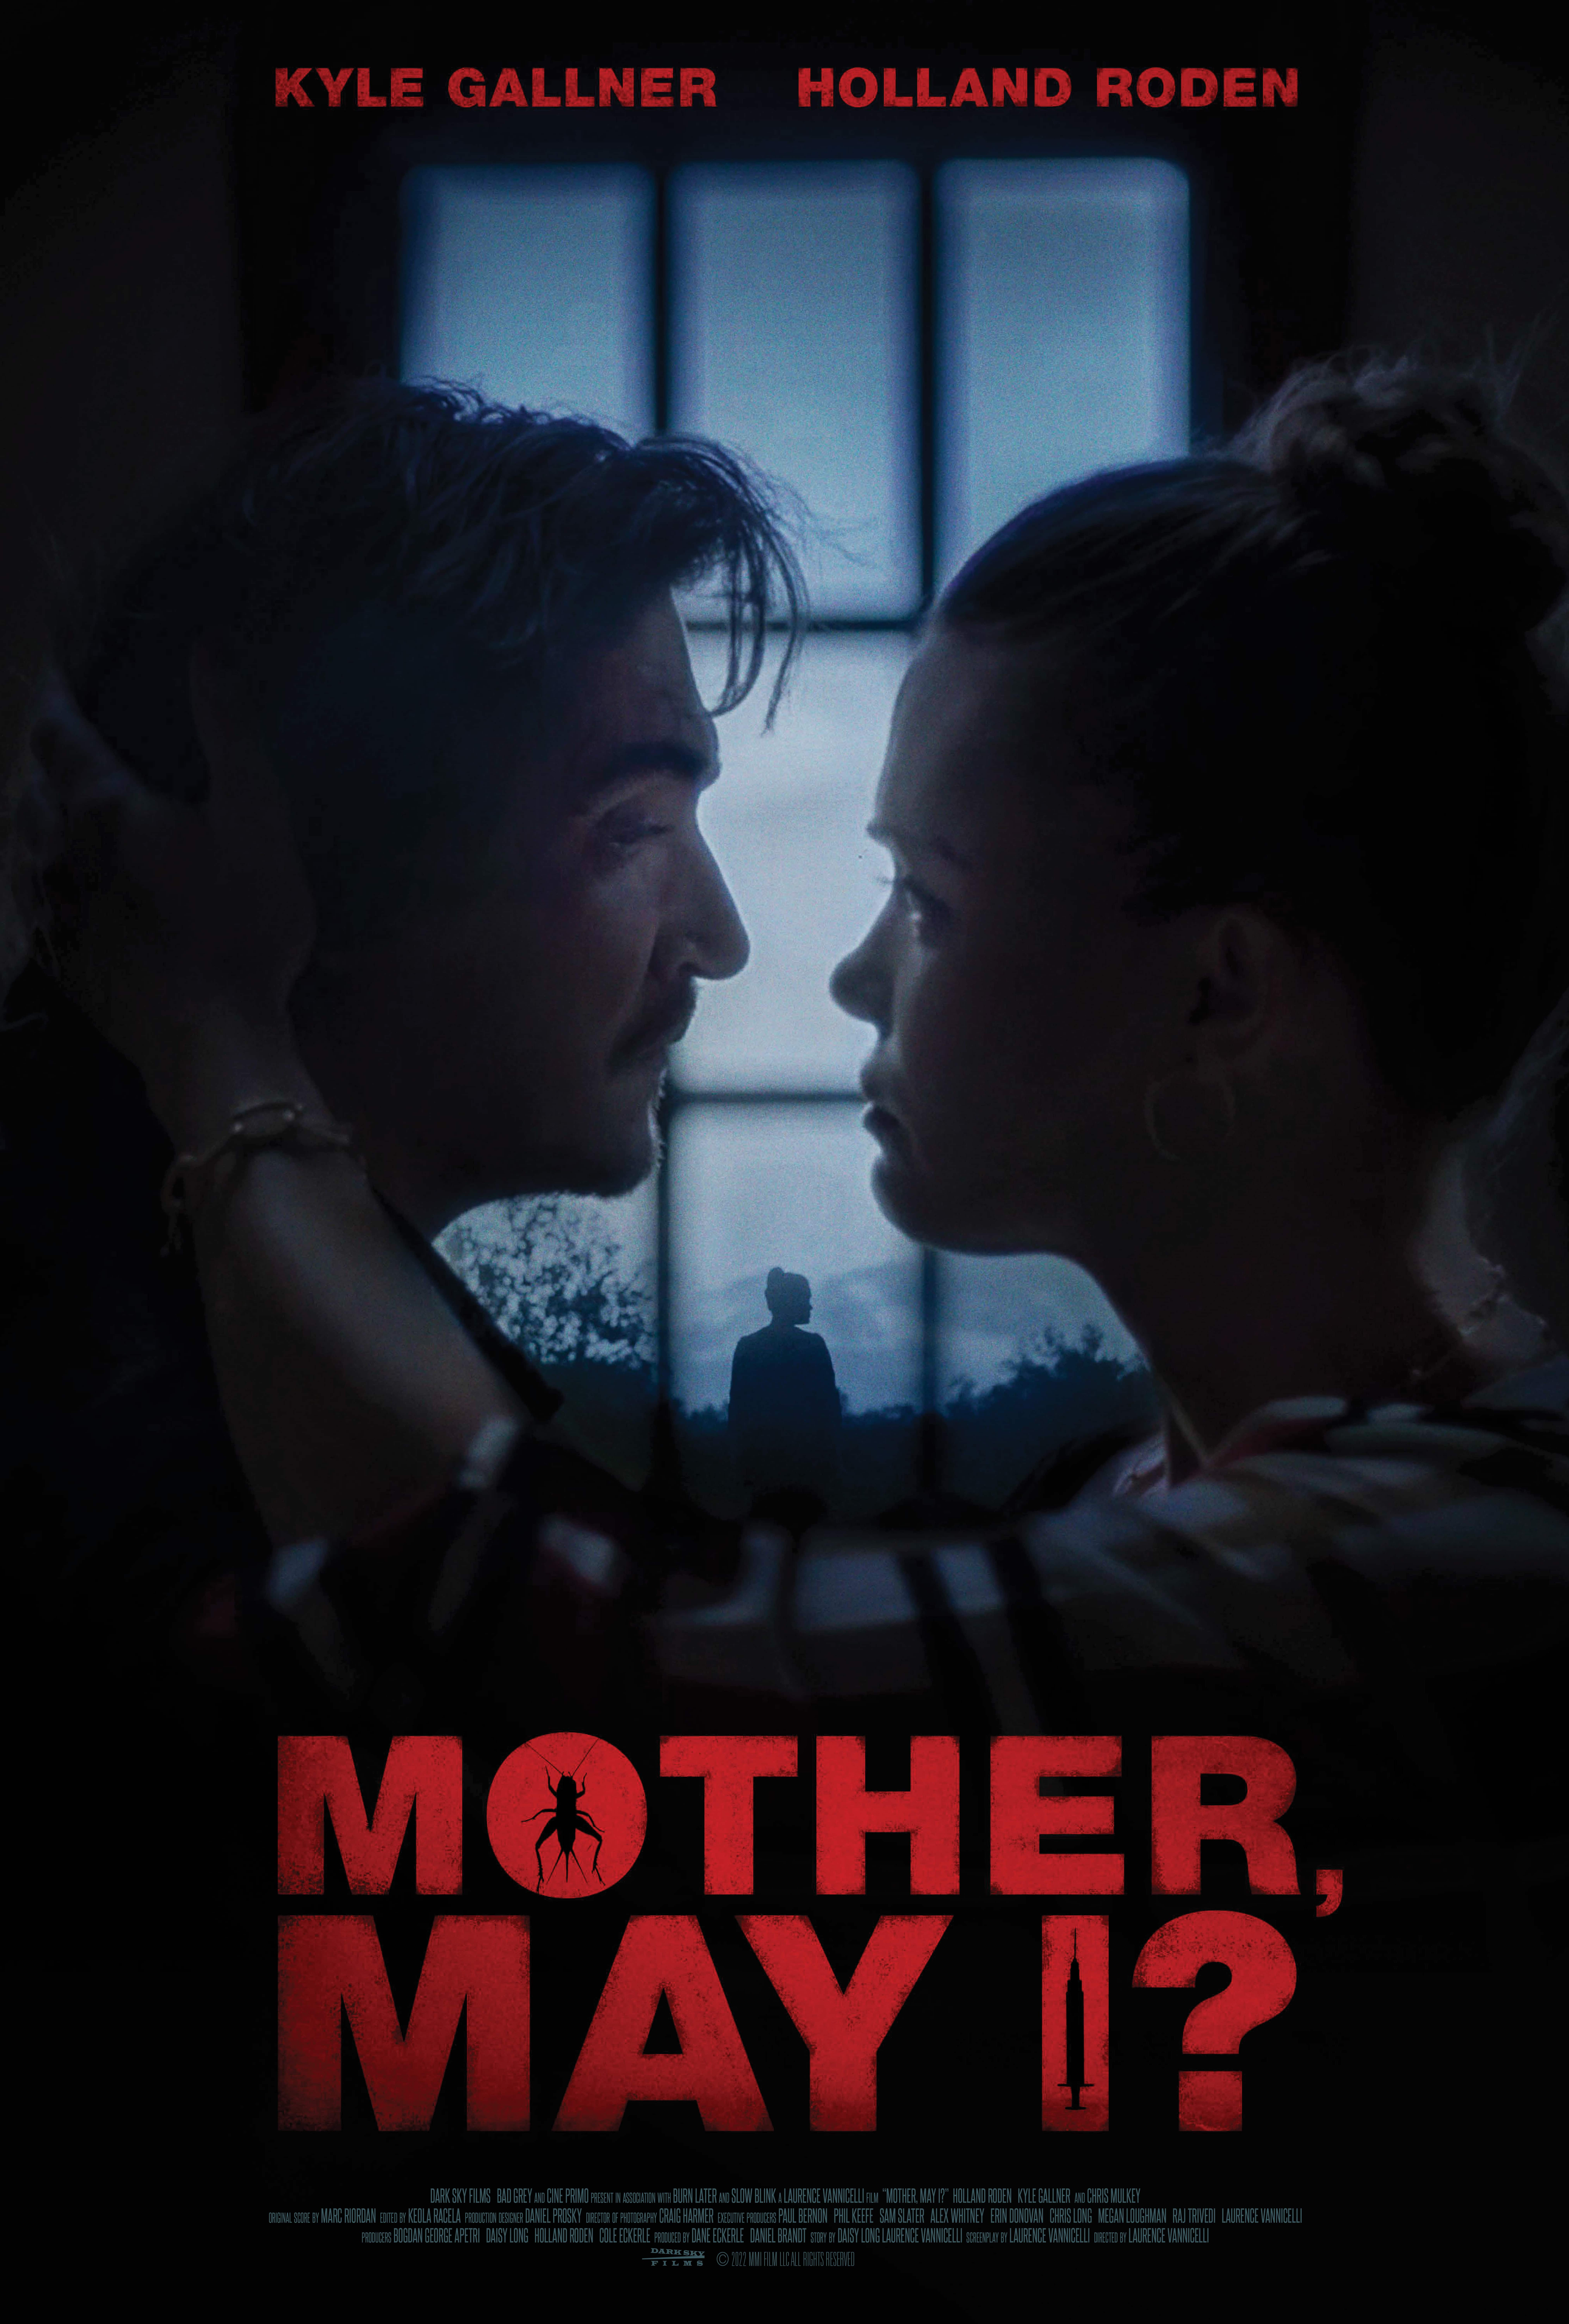 Mother, May I? - A Spine-Chilling Thriller Arriving Soon 19